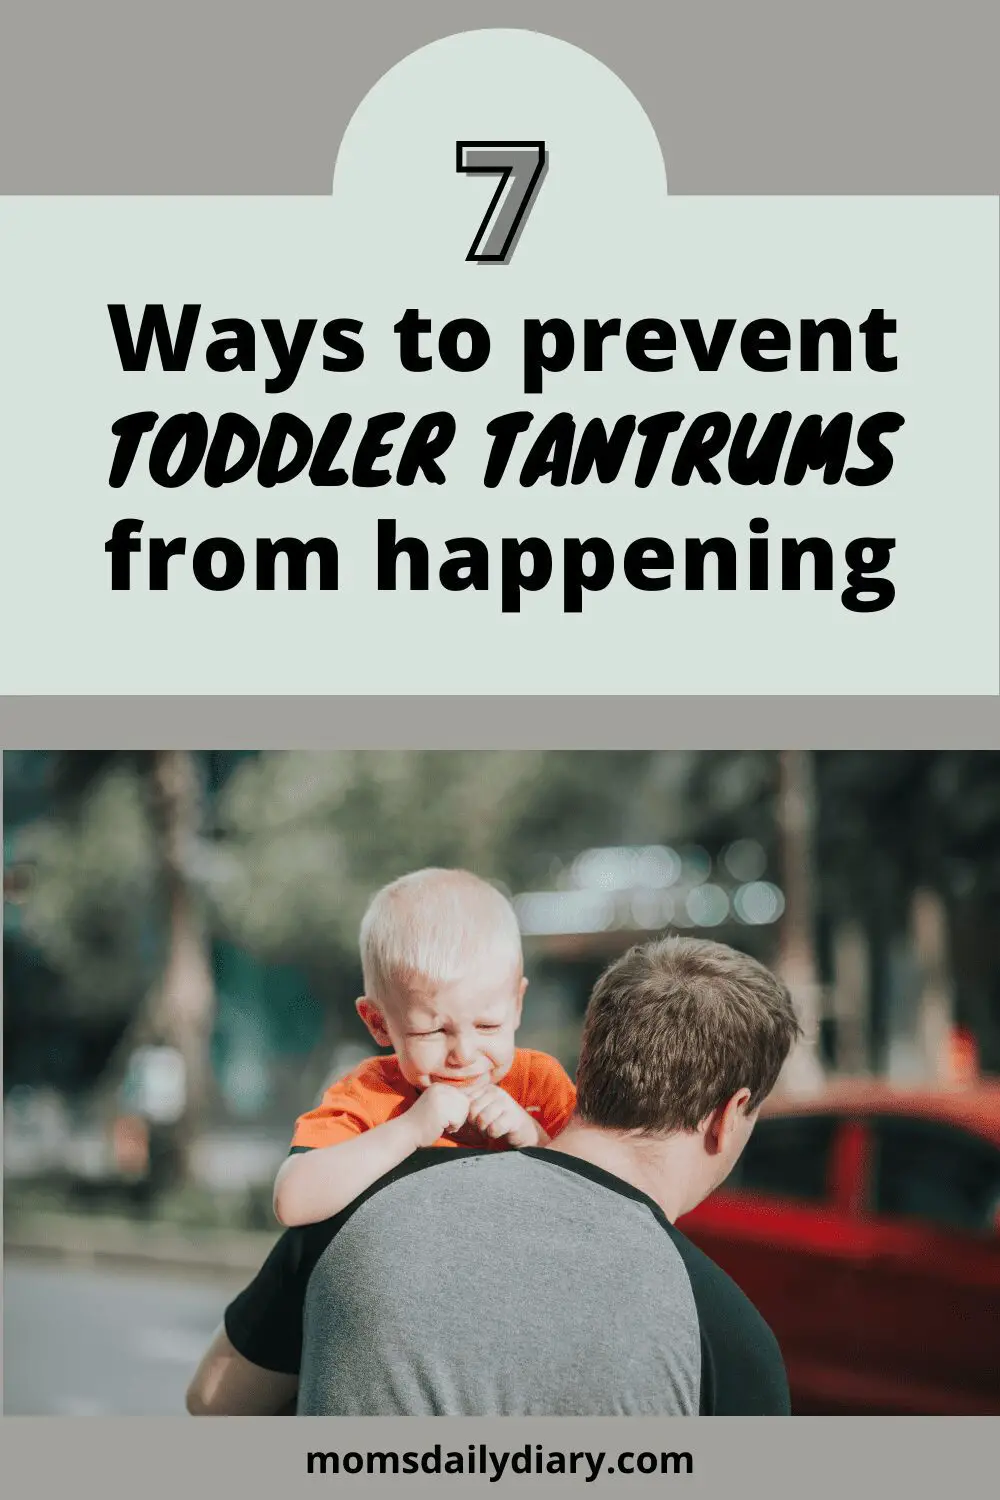 Only one thing is better than knowing how to handle toddler tantrums and it is how to prevent them from happening.